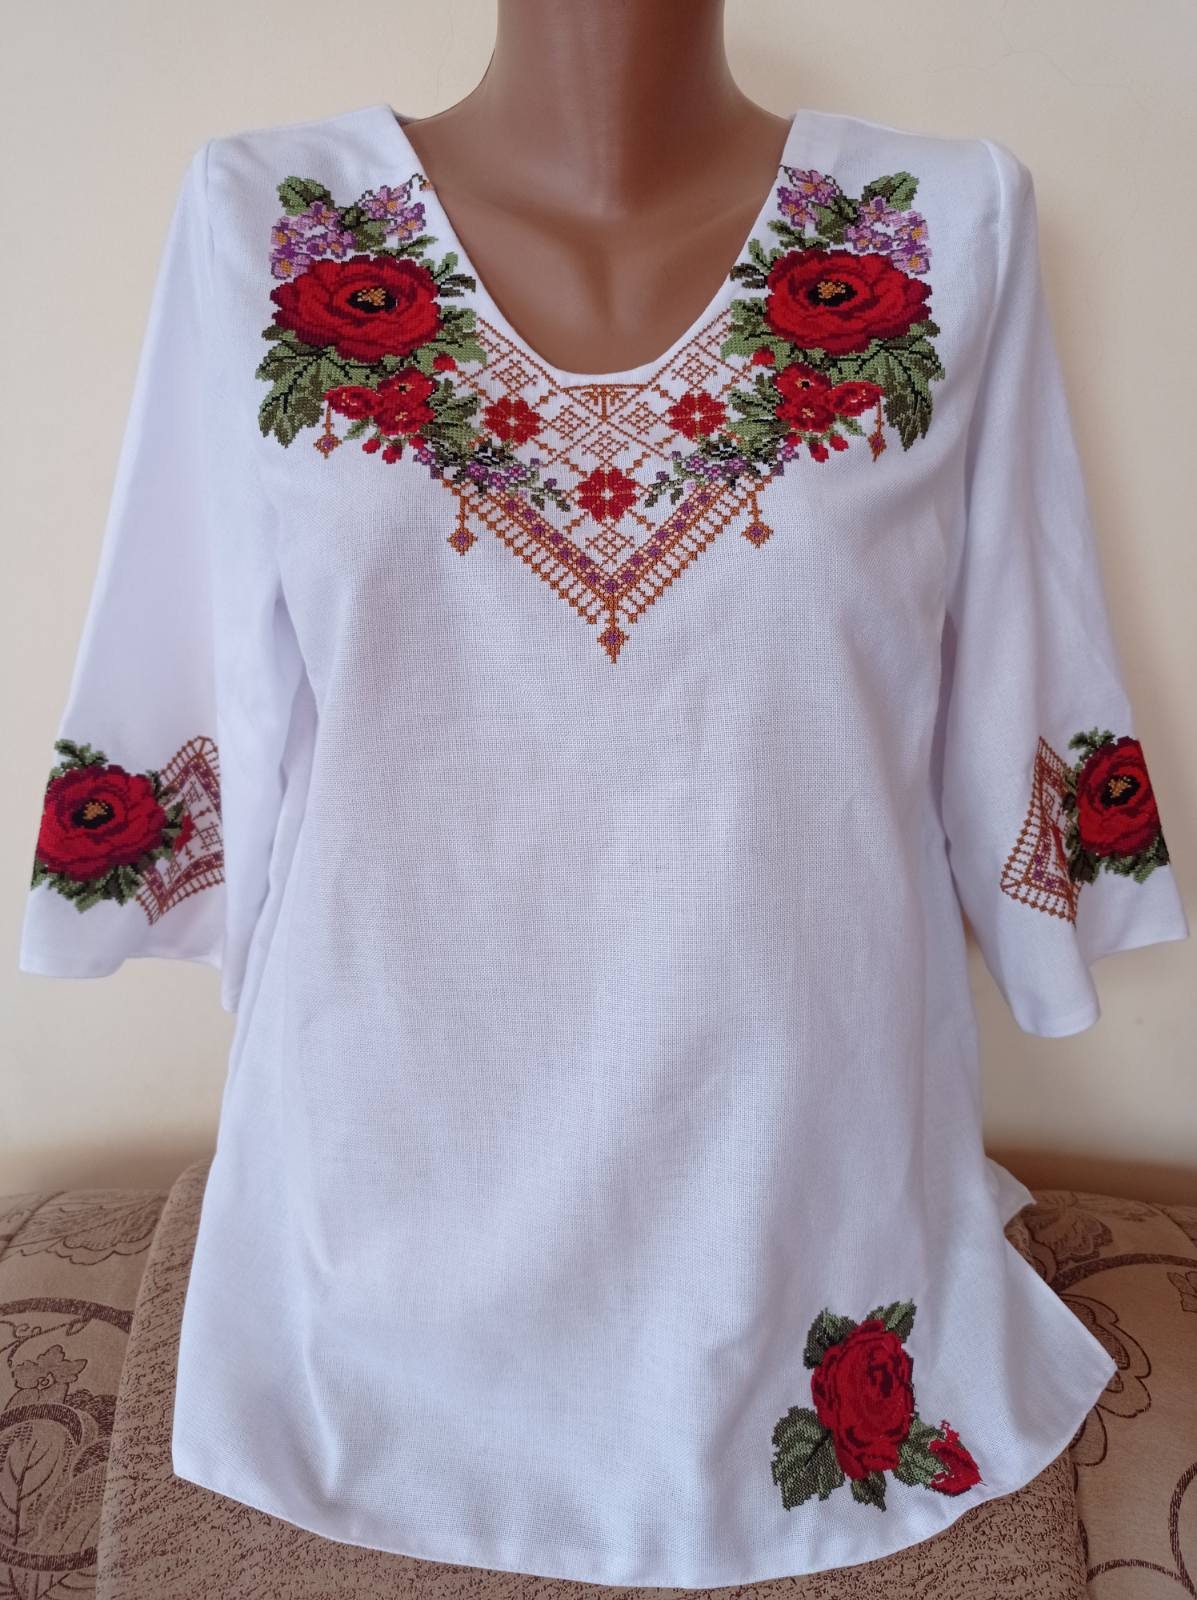 Blouse floral pattern Embrodered roses blouse White vyshyvanka | Etsy